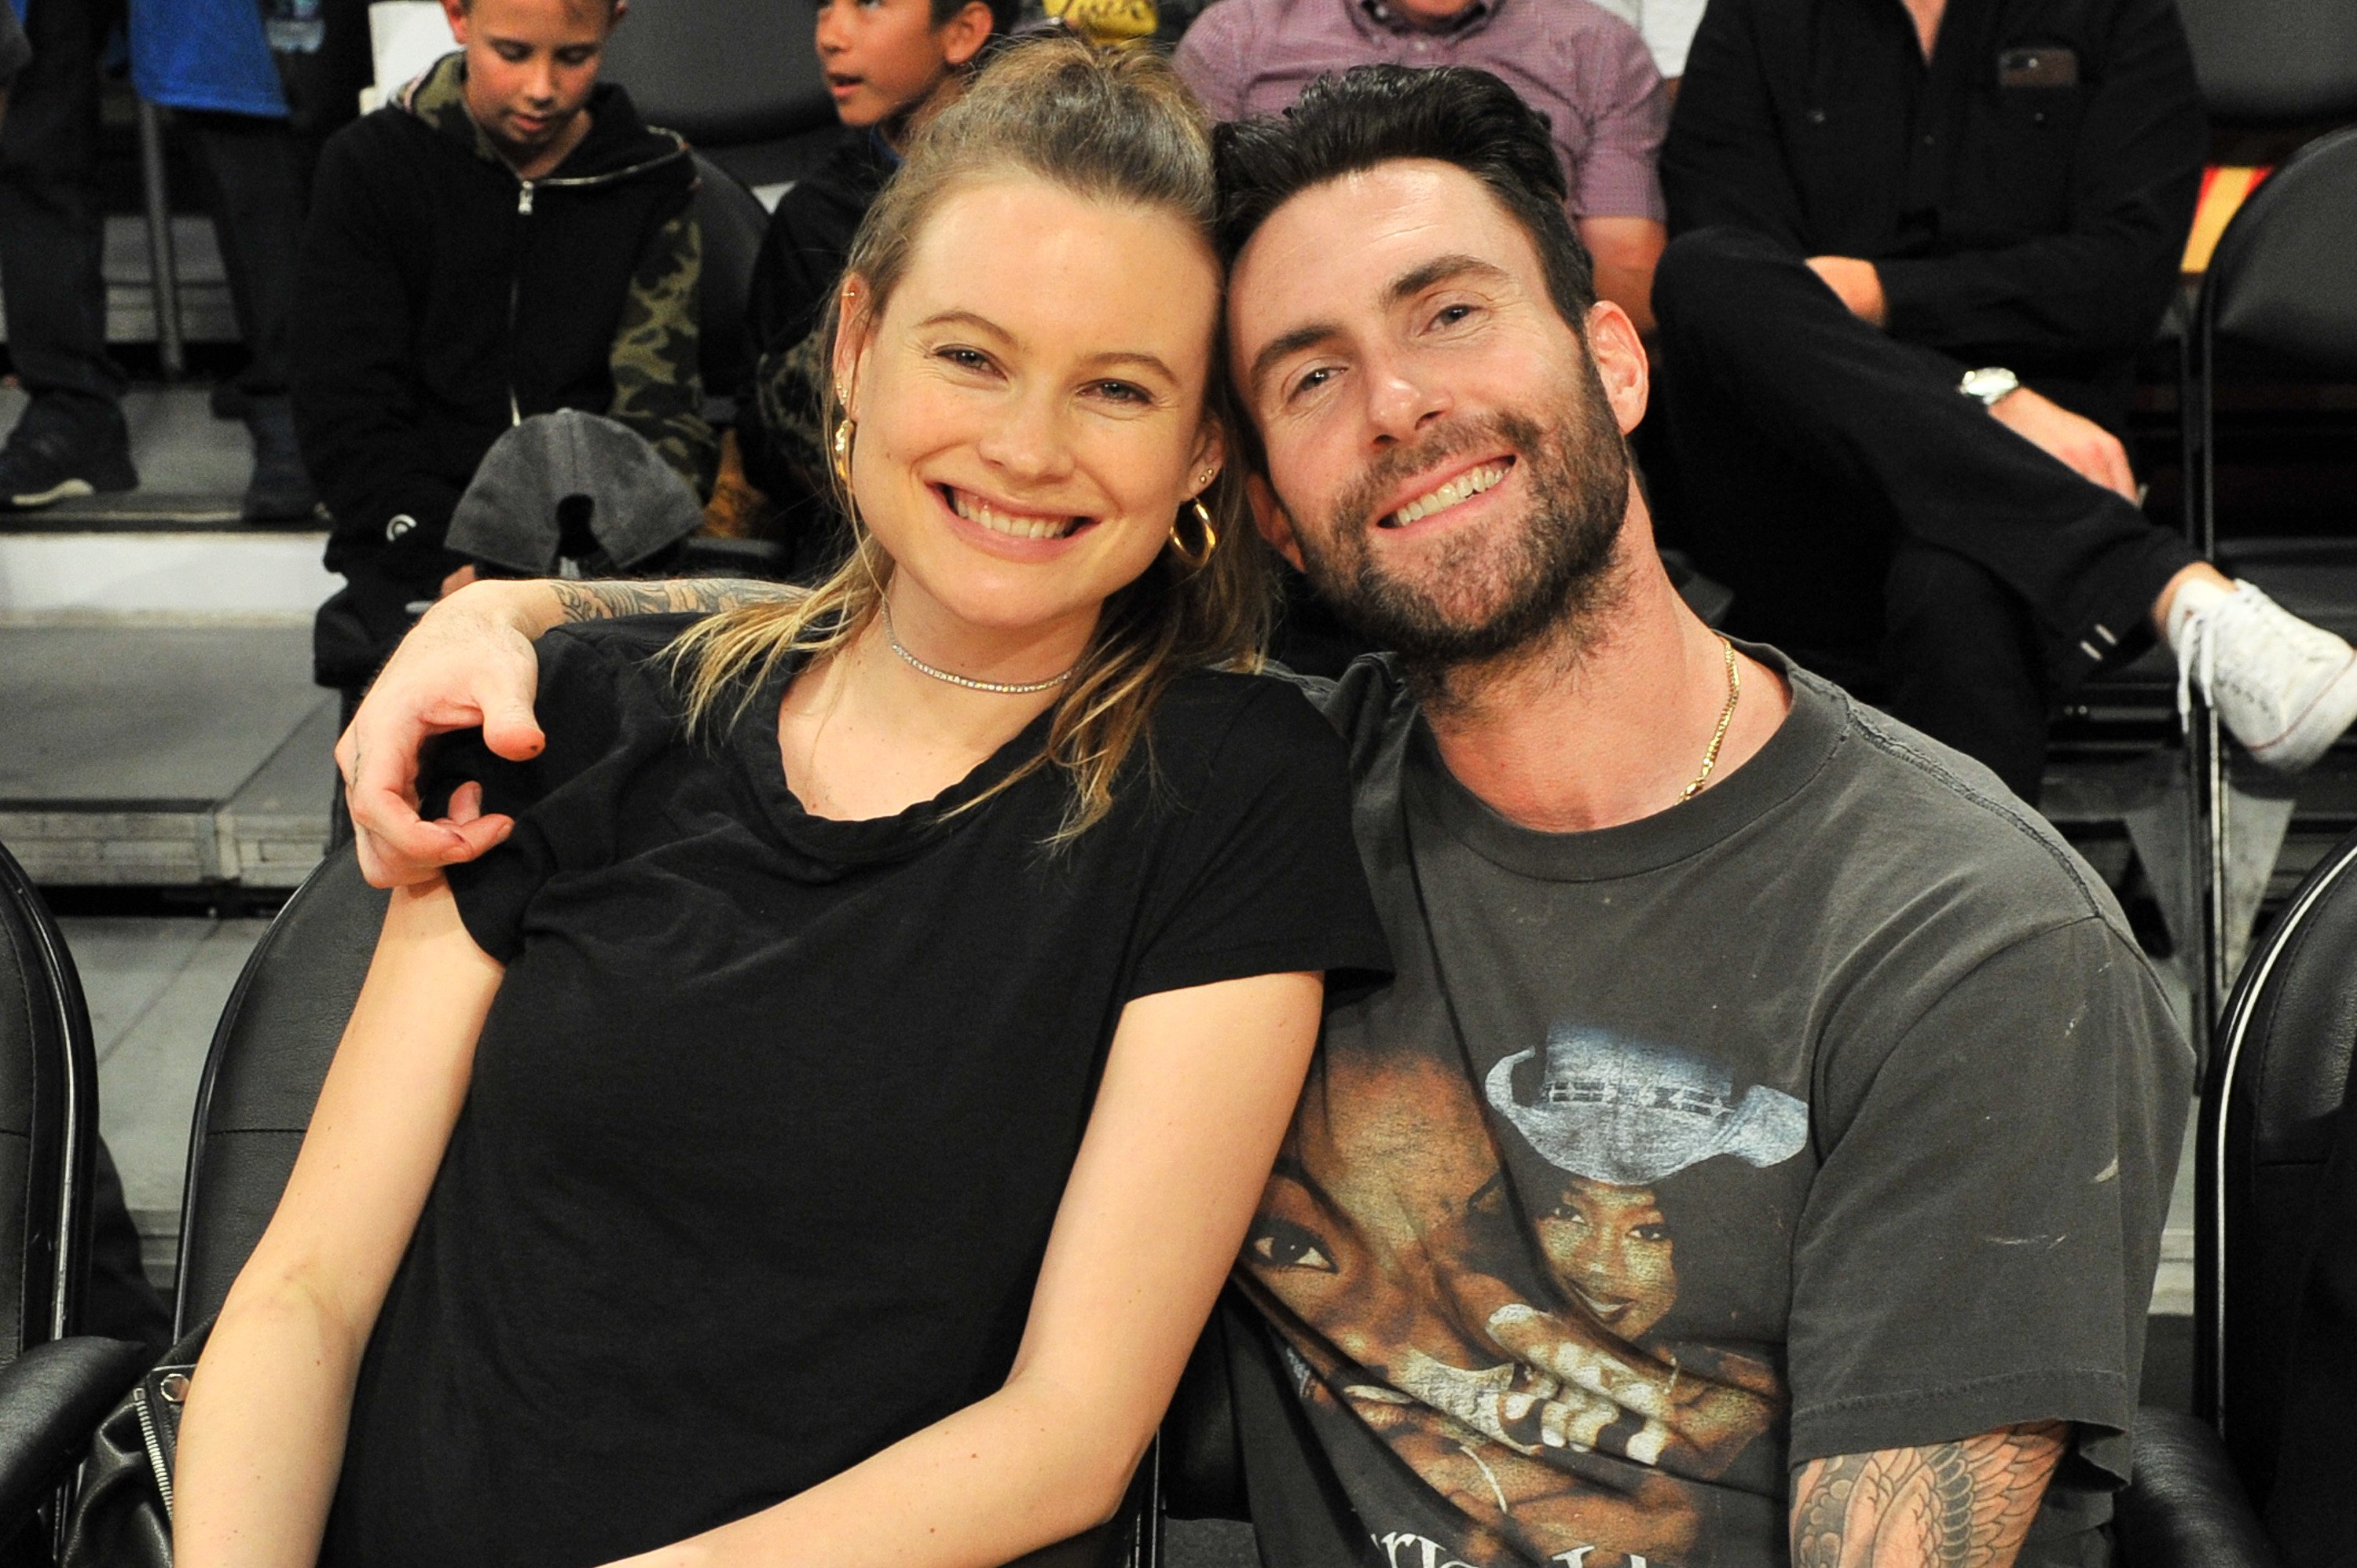 Behati Prinsloo and Adam Levine at the basketball game between the Los Angeles Lakers and the Philadelphia 76ers on November 15, 2017, in Los Angeles, California. | Source: Getty Images